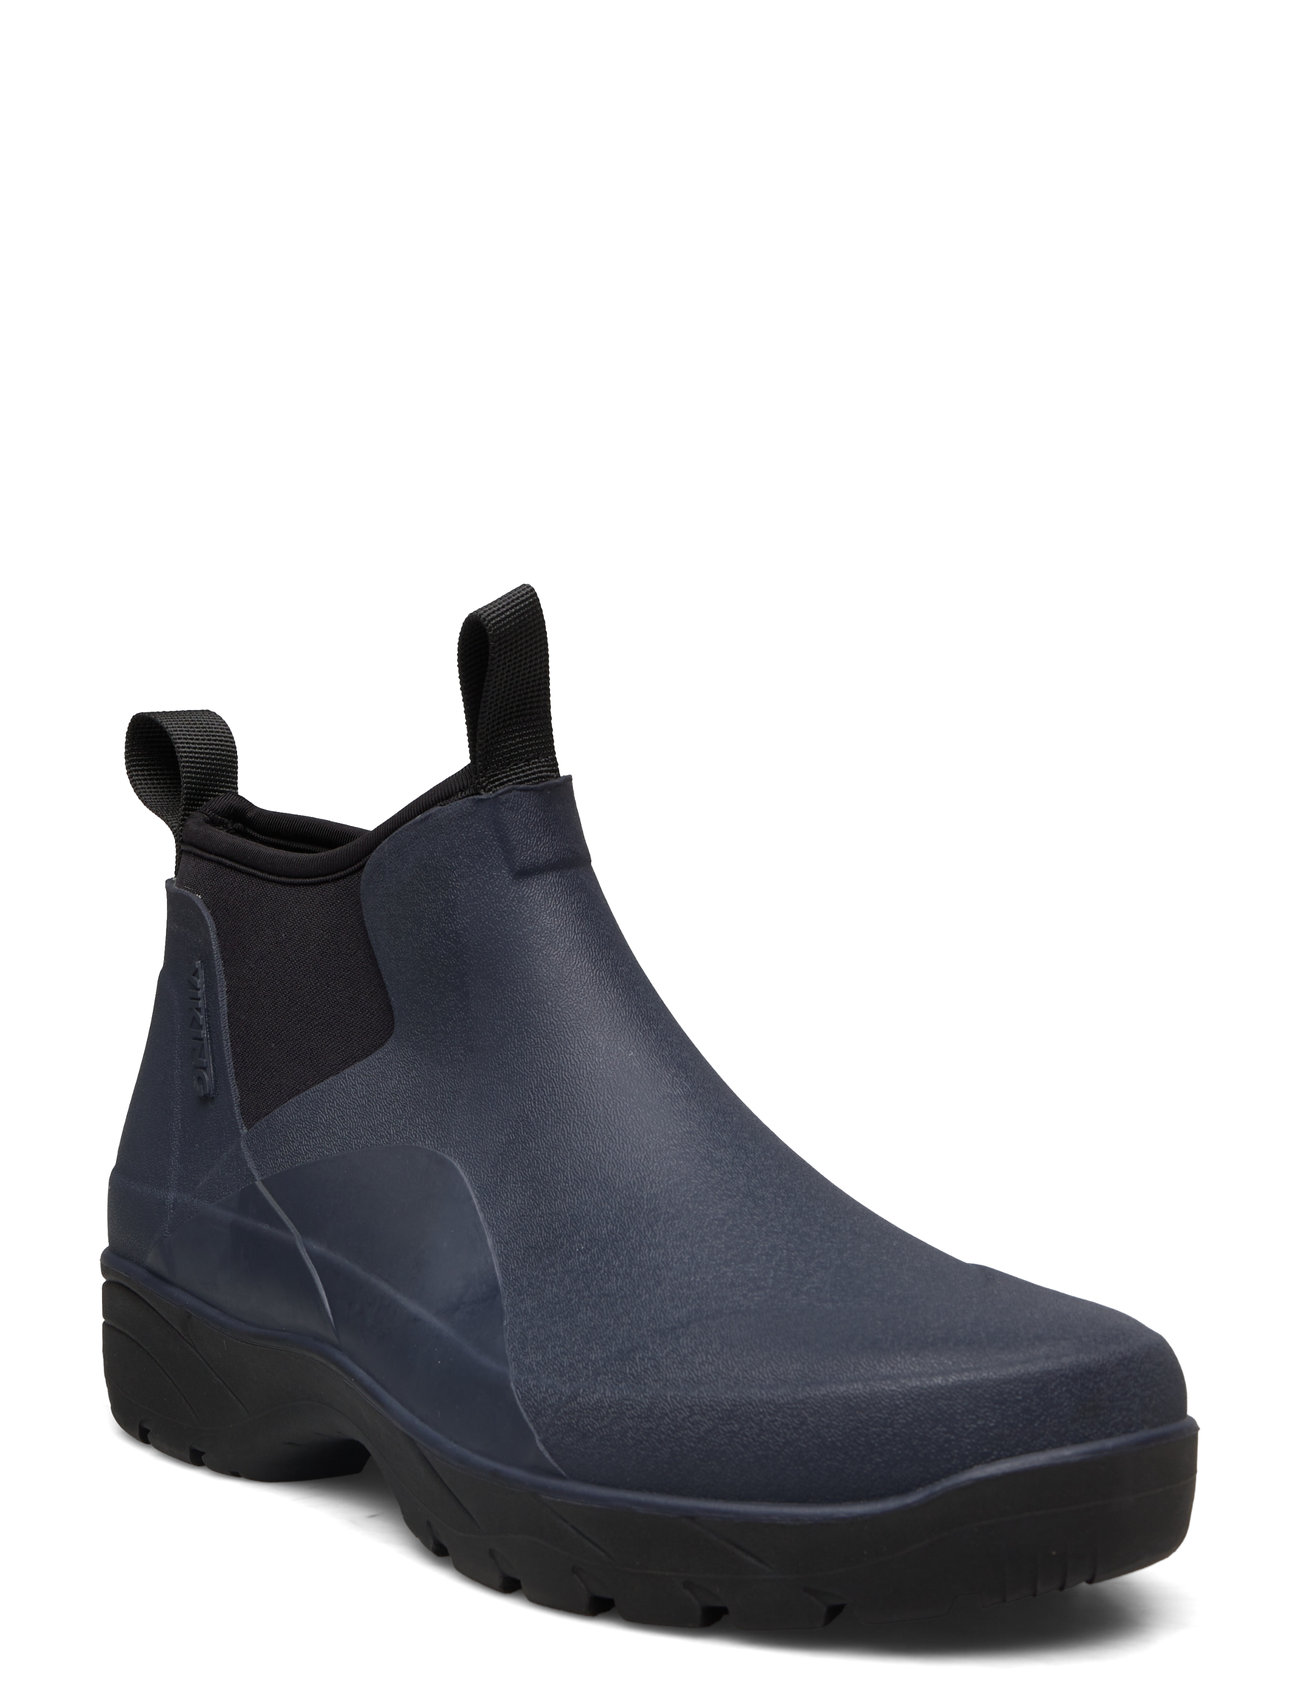 Plot Neo Low Sport Boots Chelsea Boots Navy Viking